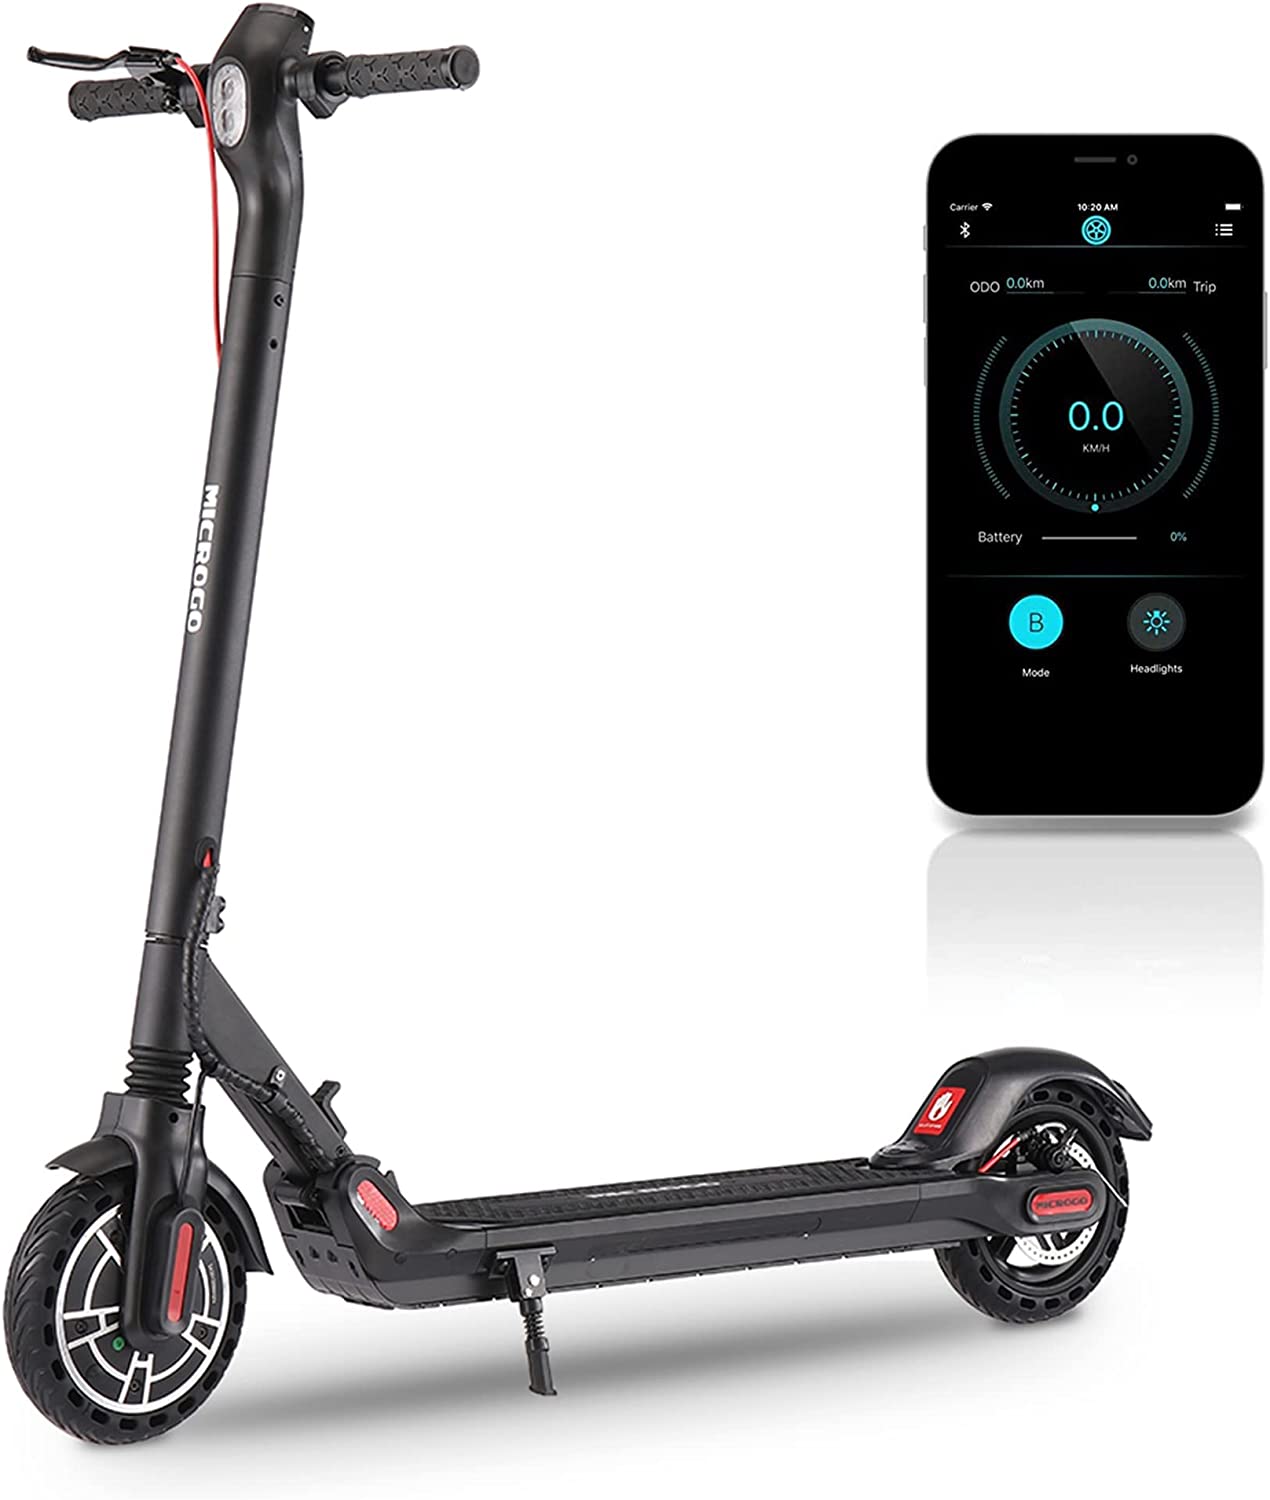 (Out of Stock) Up to 18.5 Miles Foldable Commuting Electric Scooter for Adults Teens w/ Dual Braking System & App, 19 MPH Top Speed